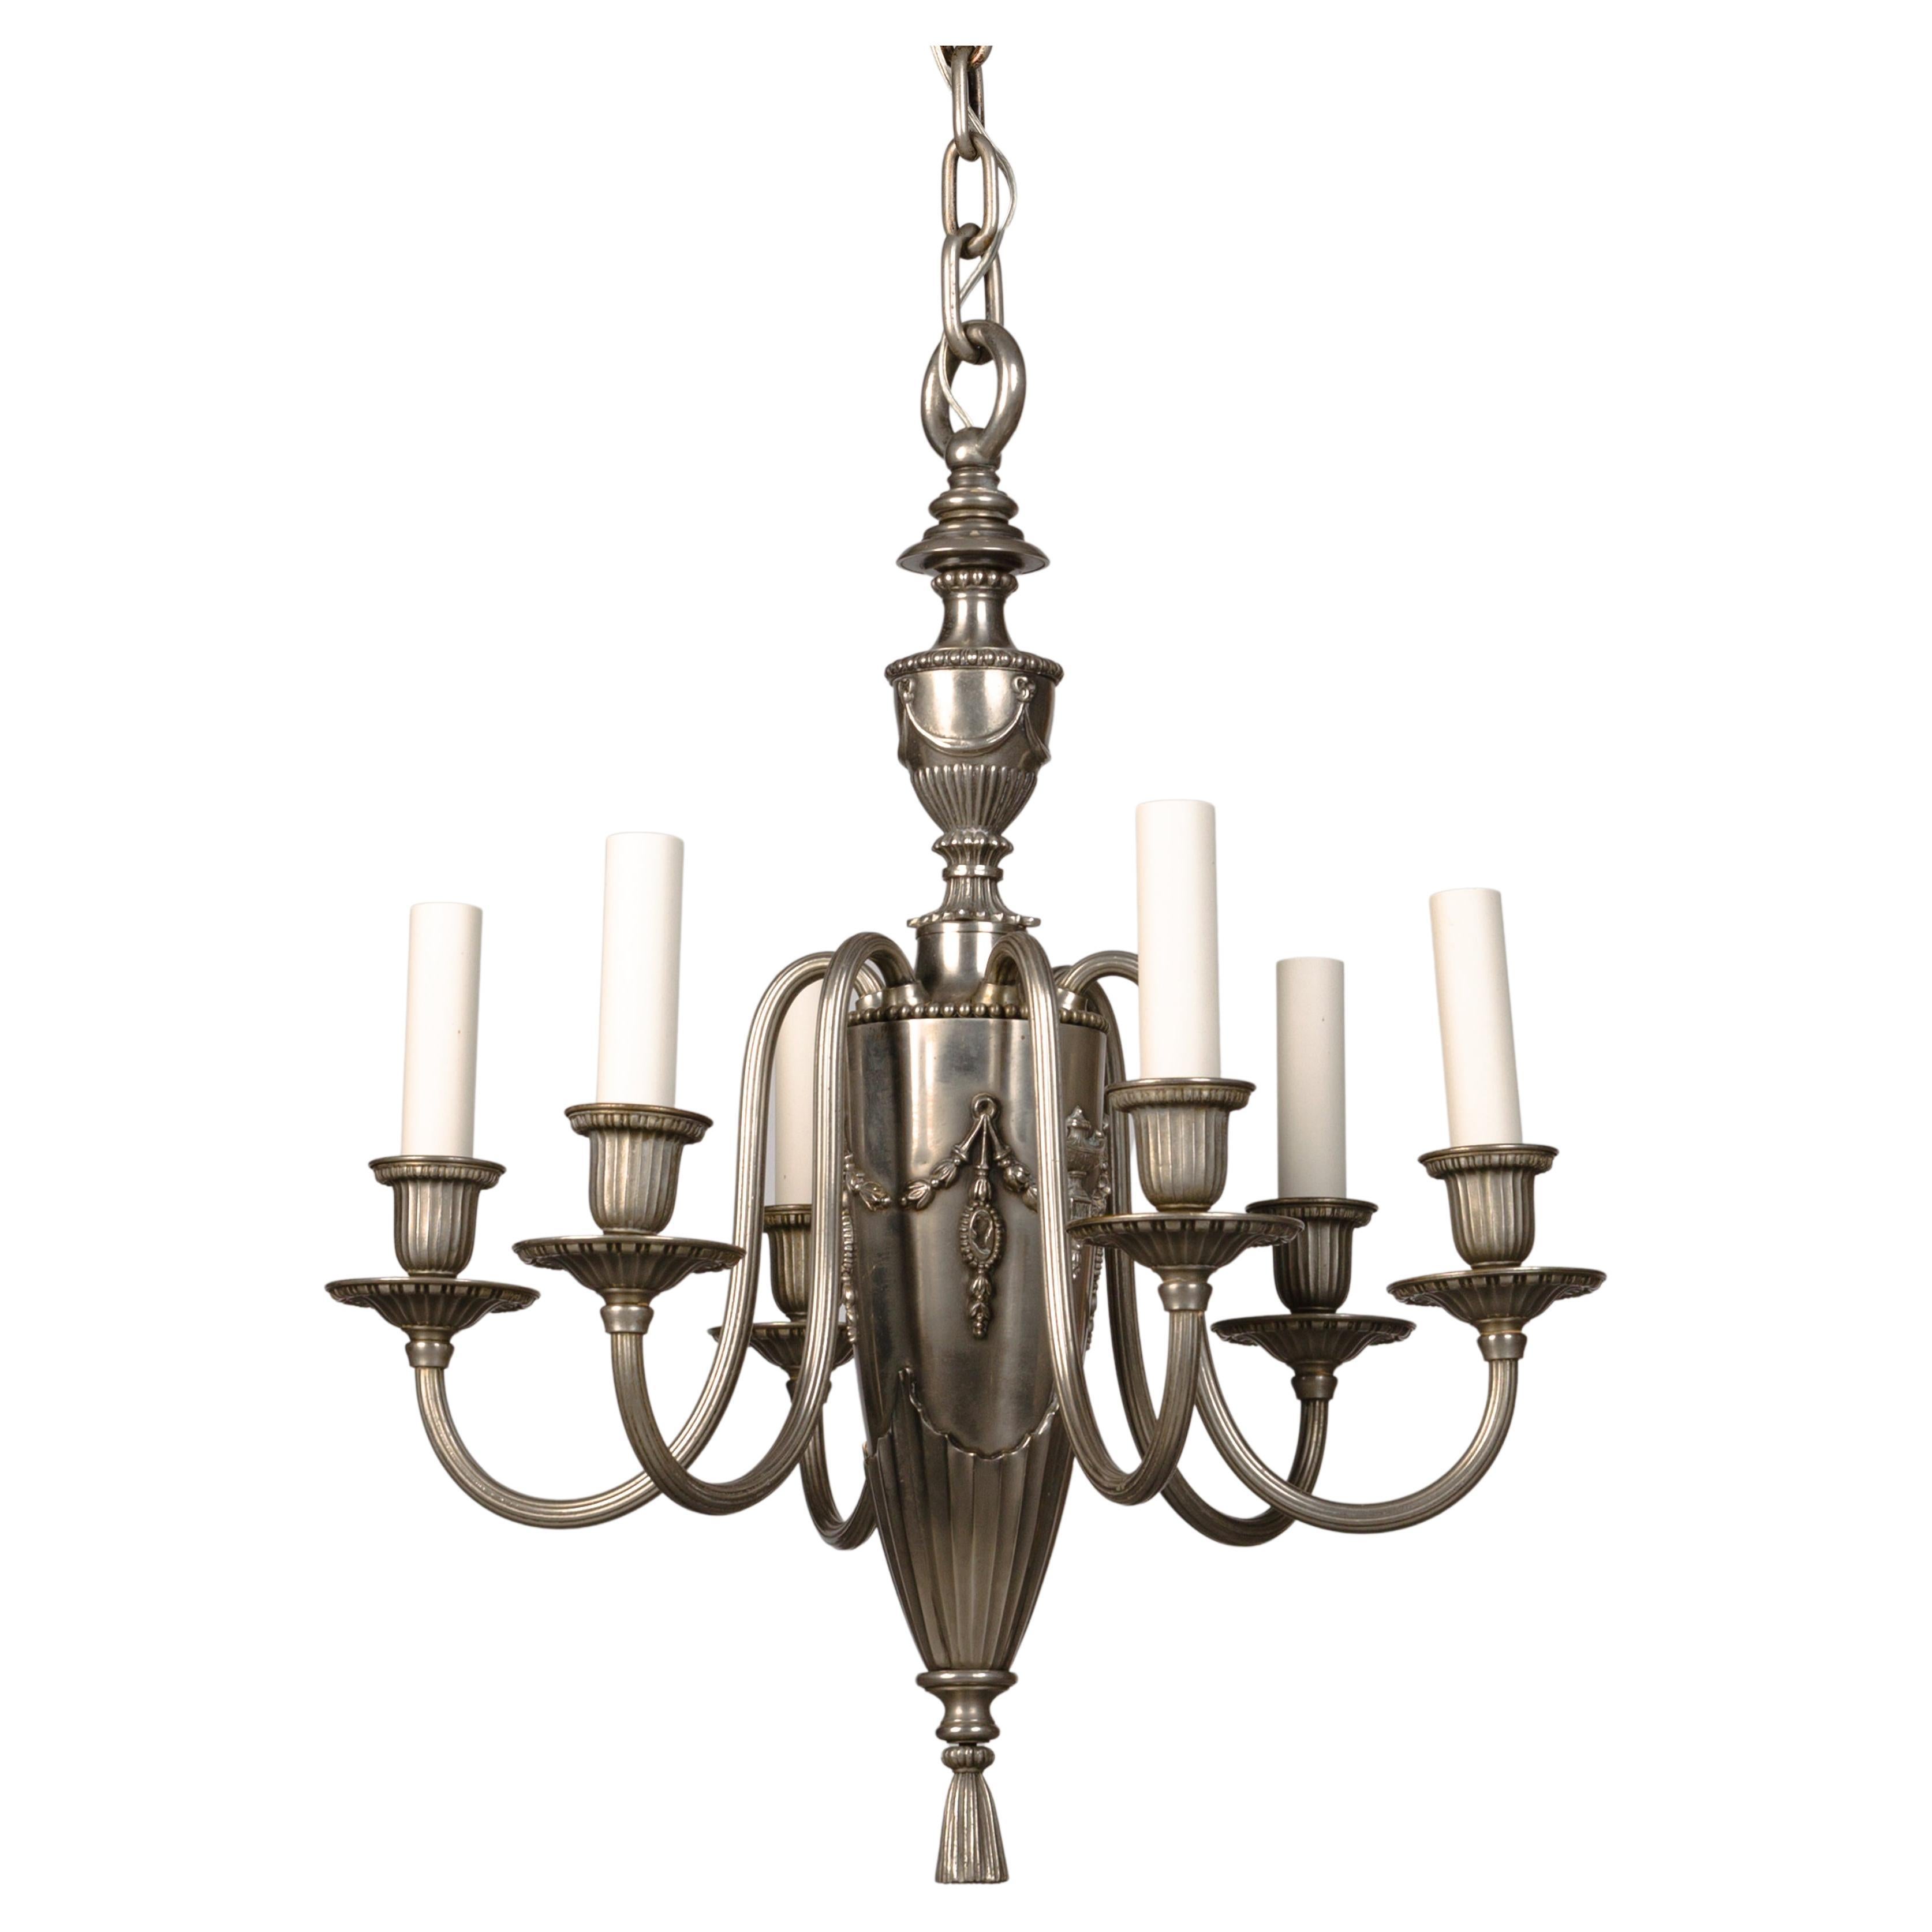 Six Arm Adam Style Chandelier in Antique Nickel by Bradley and Hubbard, c. 1920s